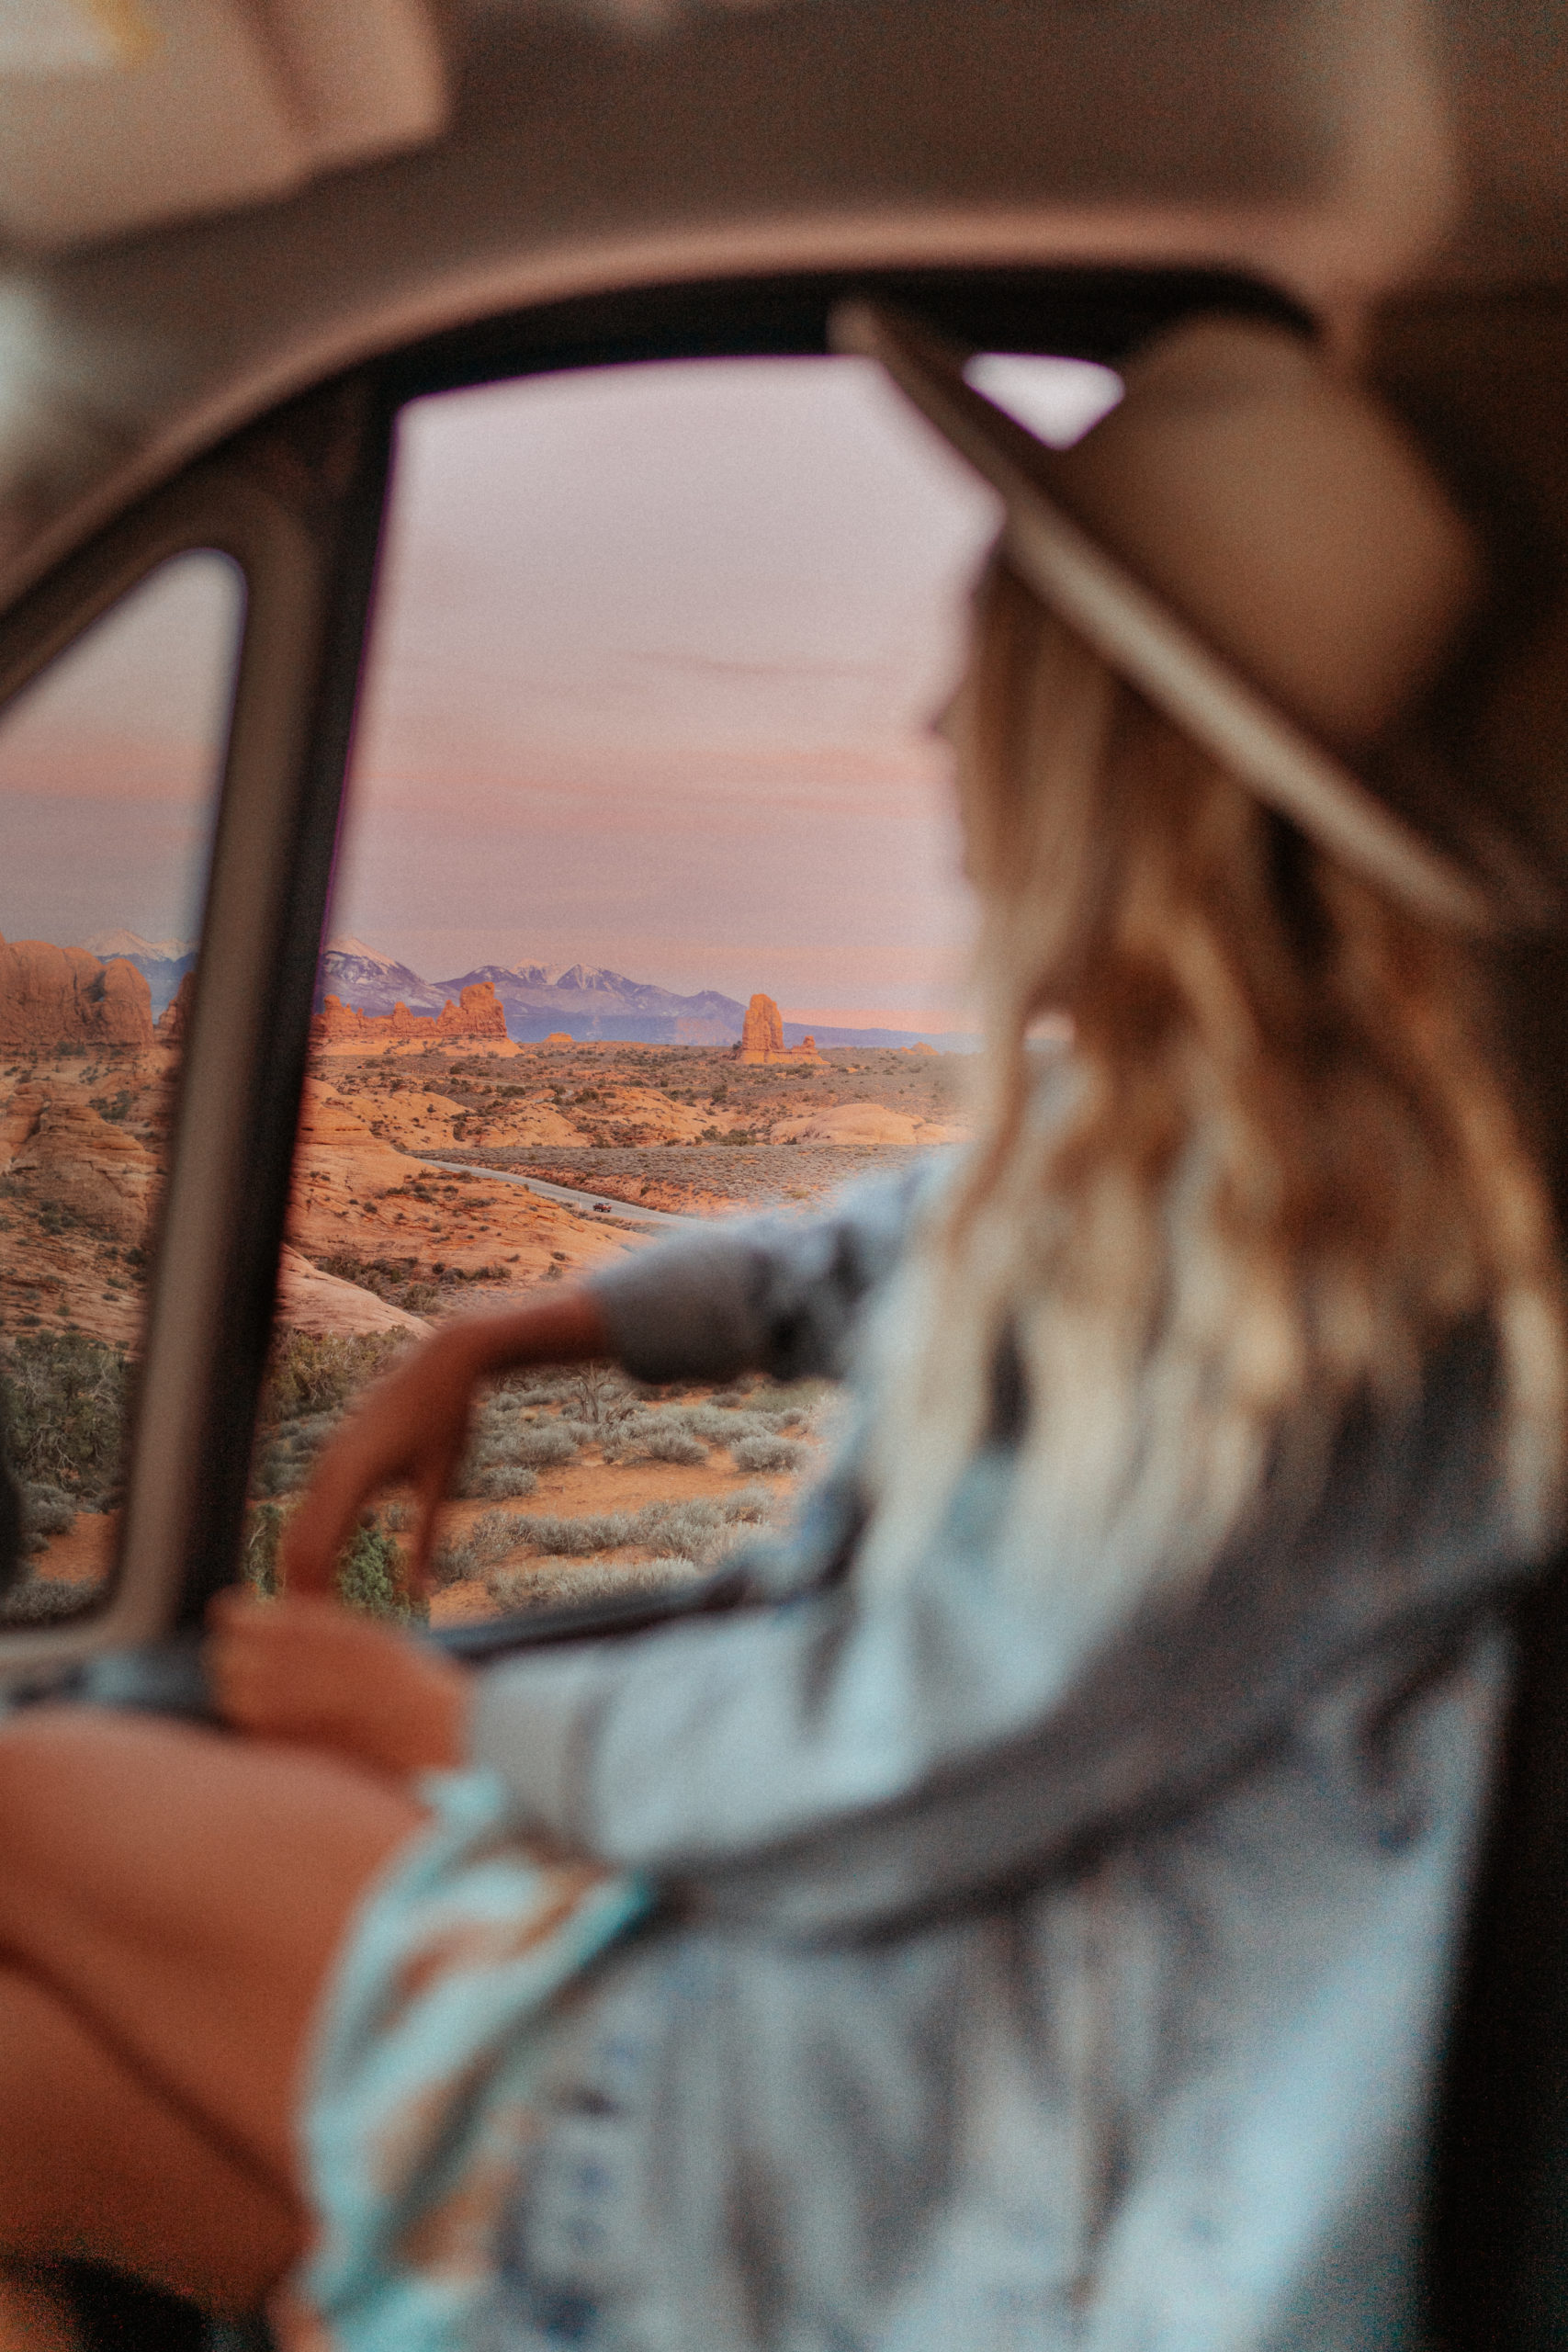 Sarah looking out car window in Arches National Park